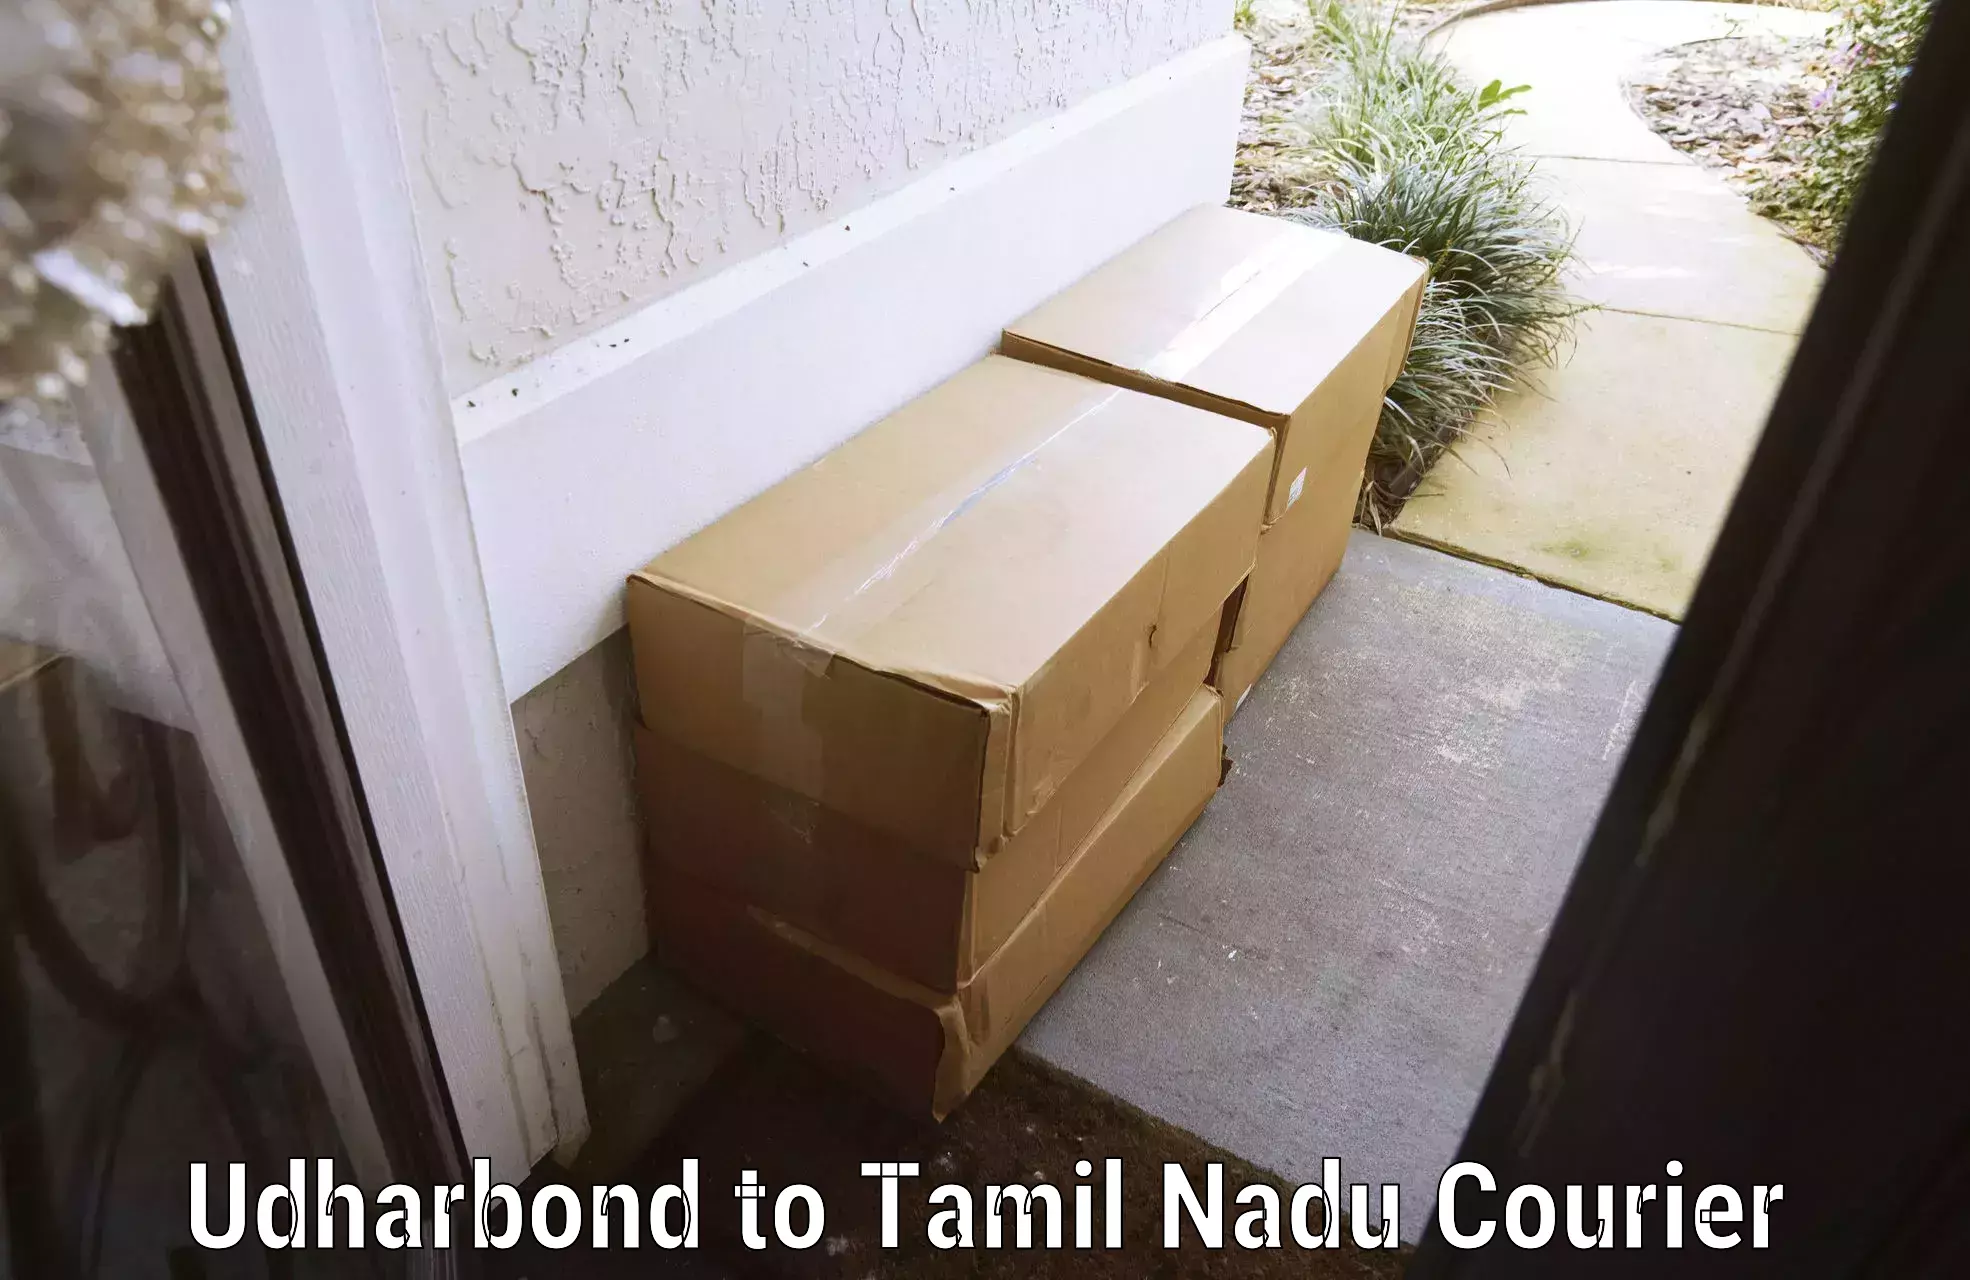 Online luggage shipping booking Udharbond to Ennore Port Chennai